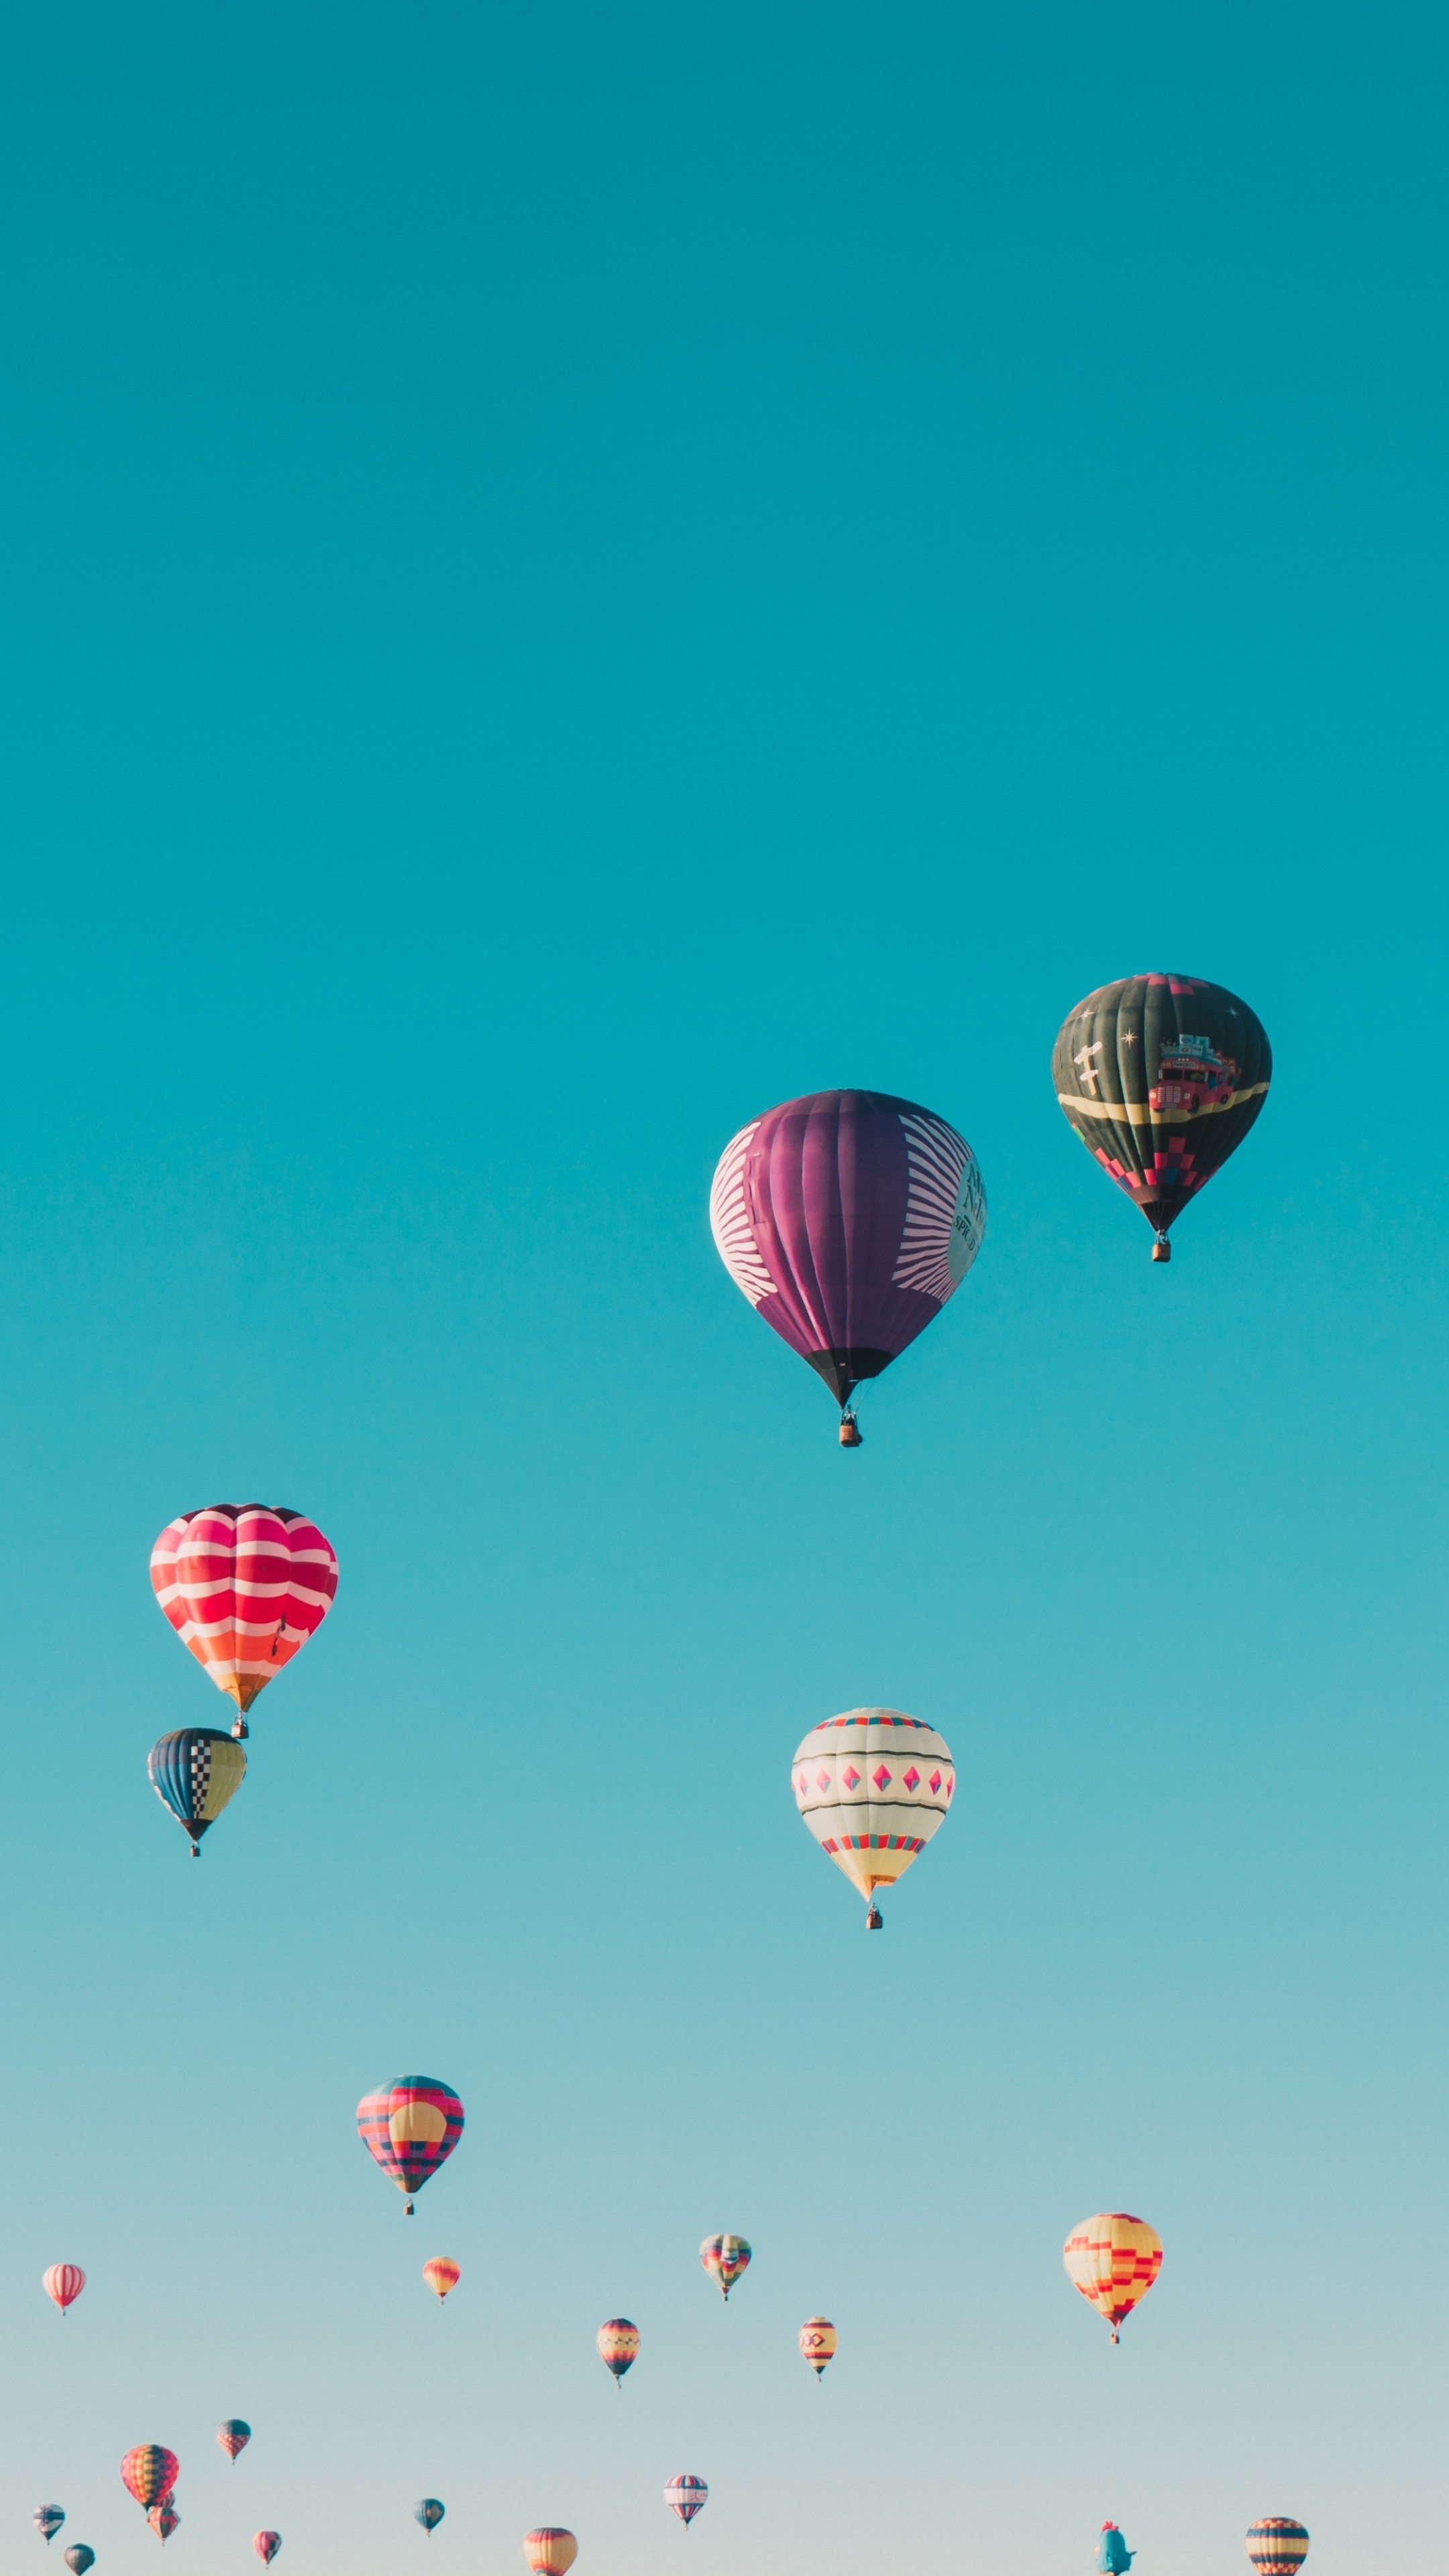 Air Sports: Balloons go up to the sky, Good weather permitting. 2160x3840 4K Wallpaper.